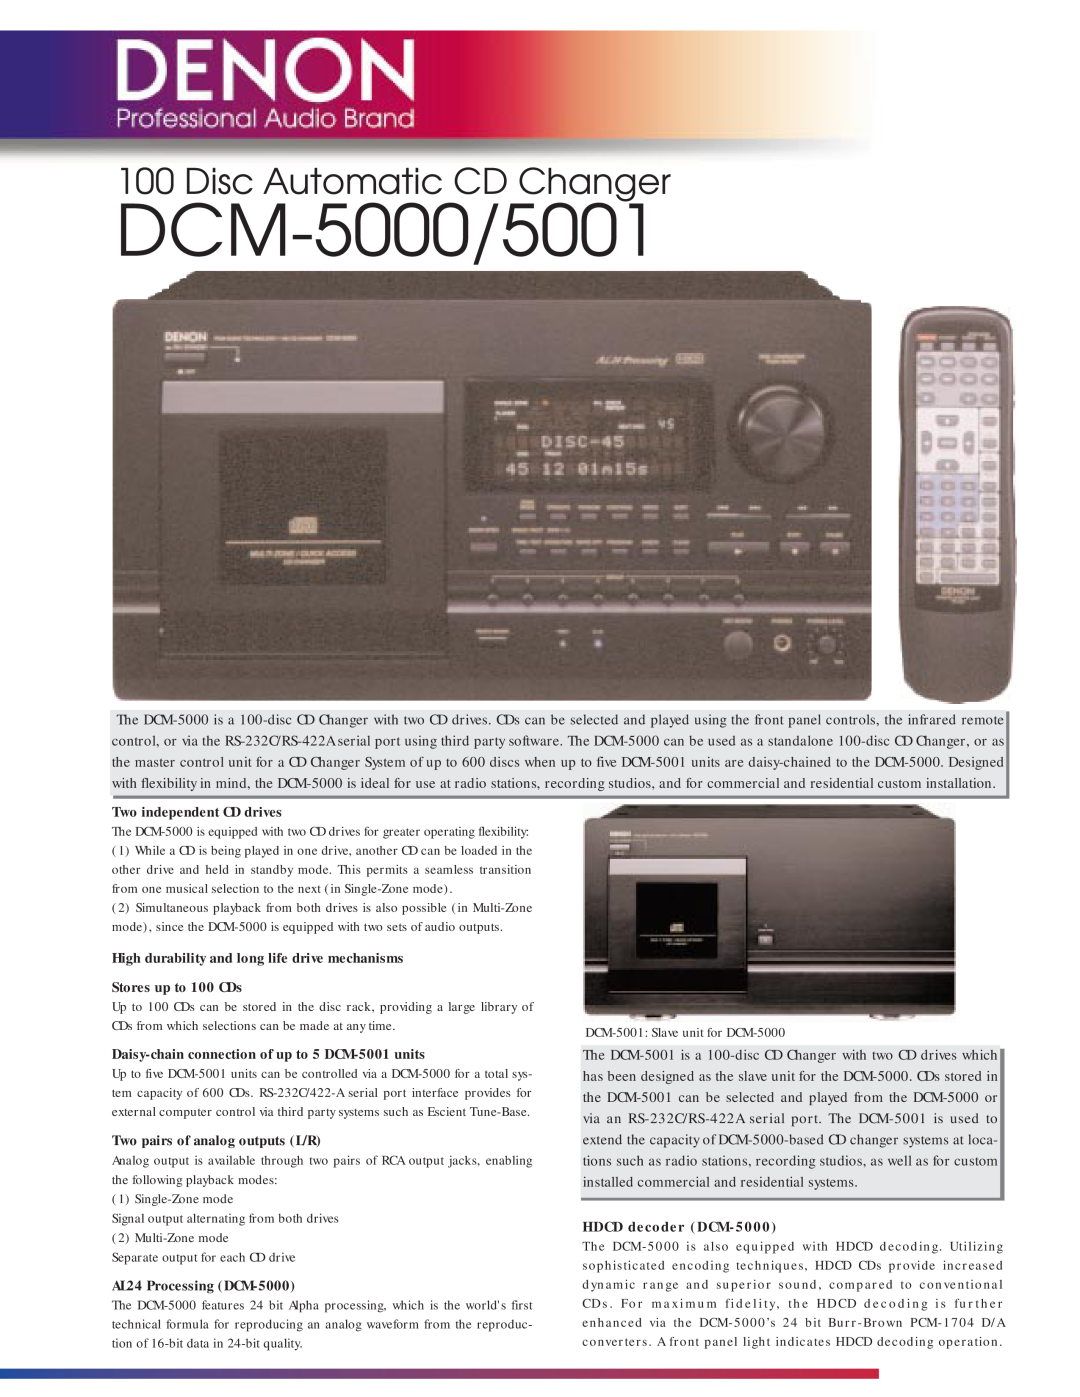 Denon DCM-5000 manual Two independent CD drives, High durability and long life drive mechanisms, Stores up to 100 CDs 